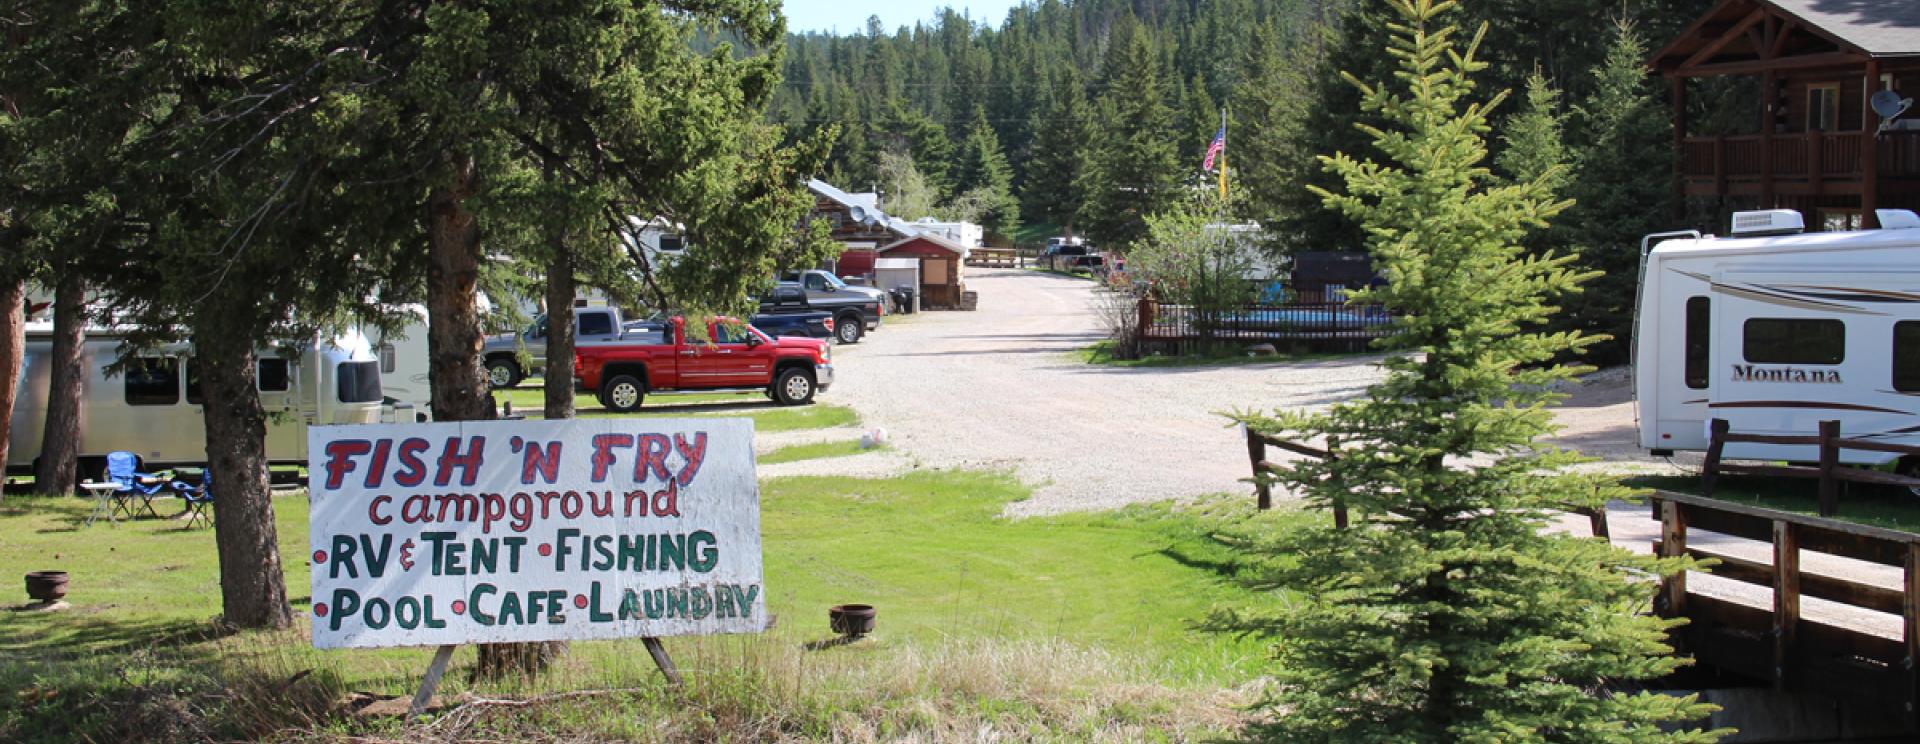 Fish 'N Fry Campground